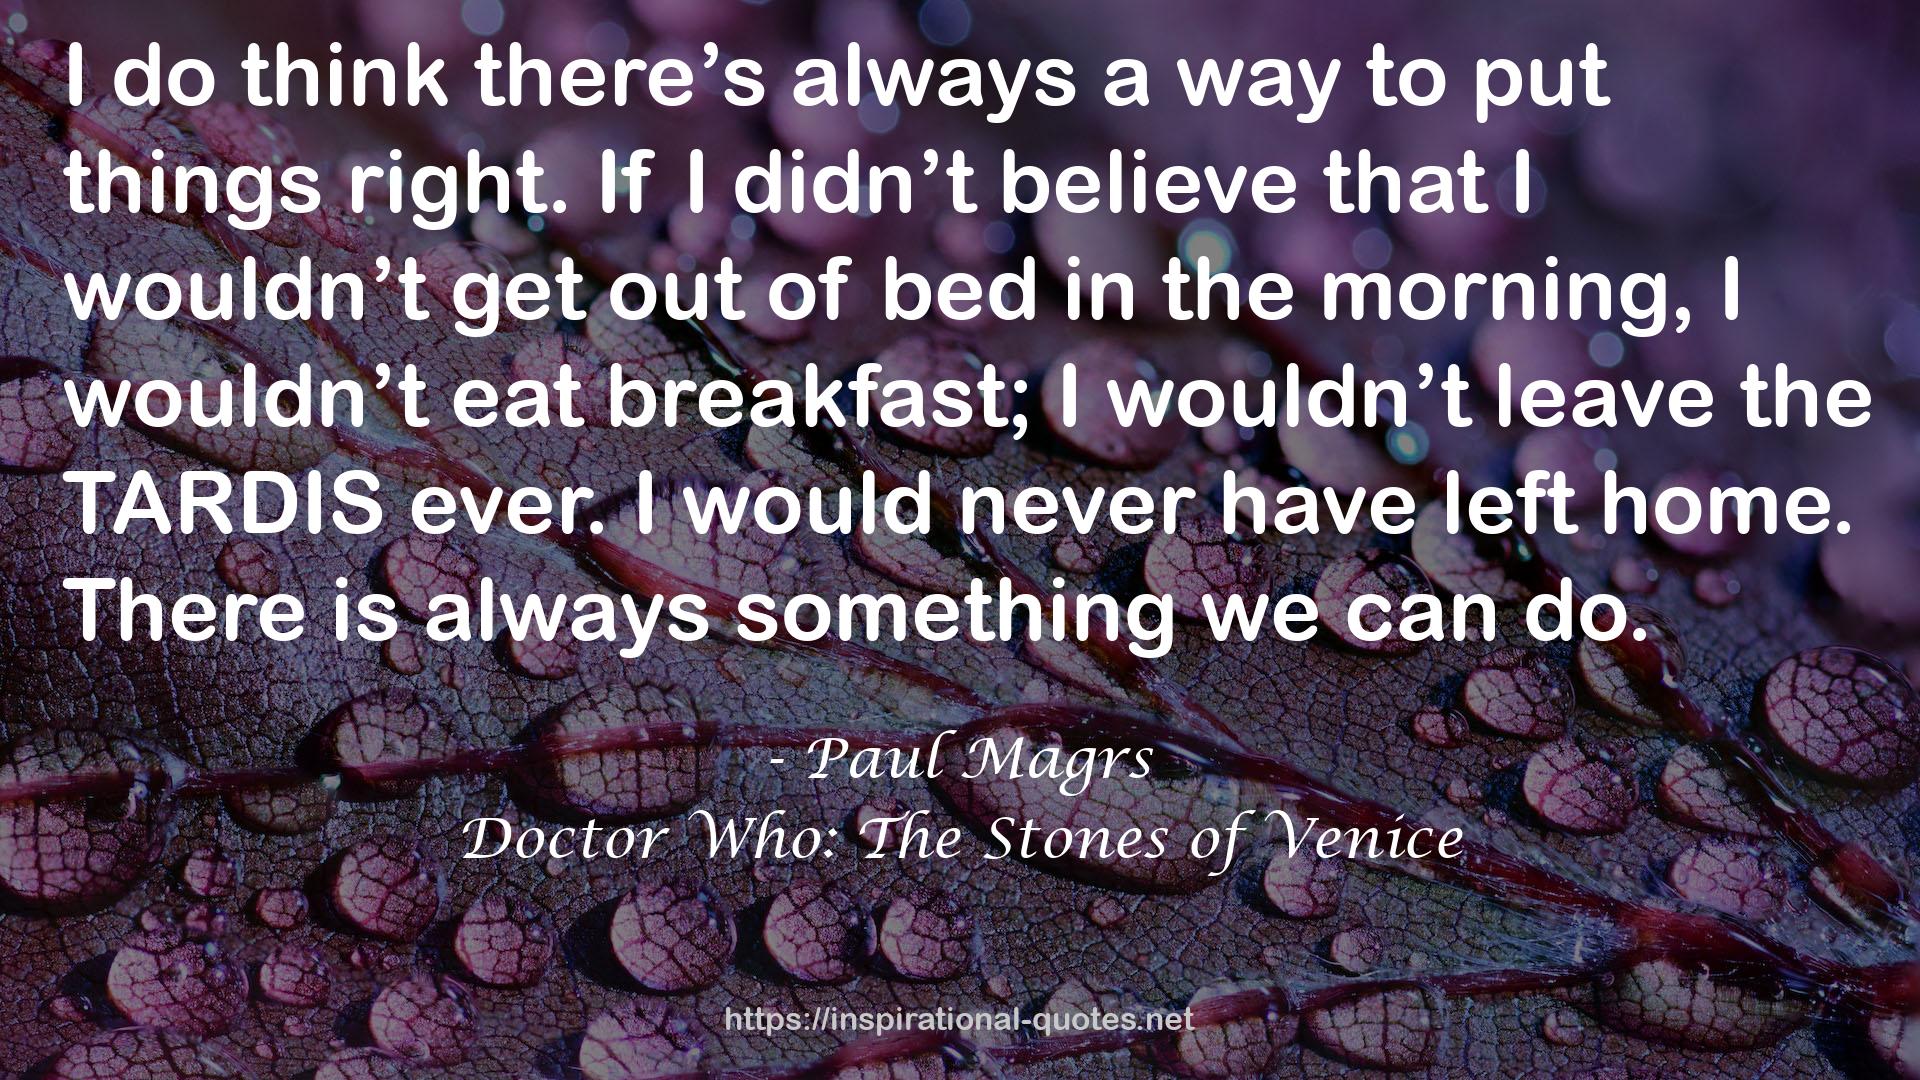 Doctor Who: The Stones of Venice QUOTES